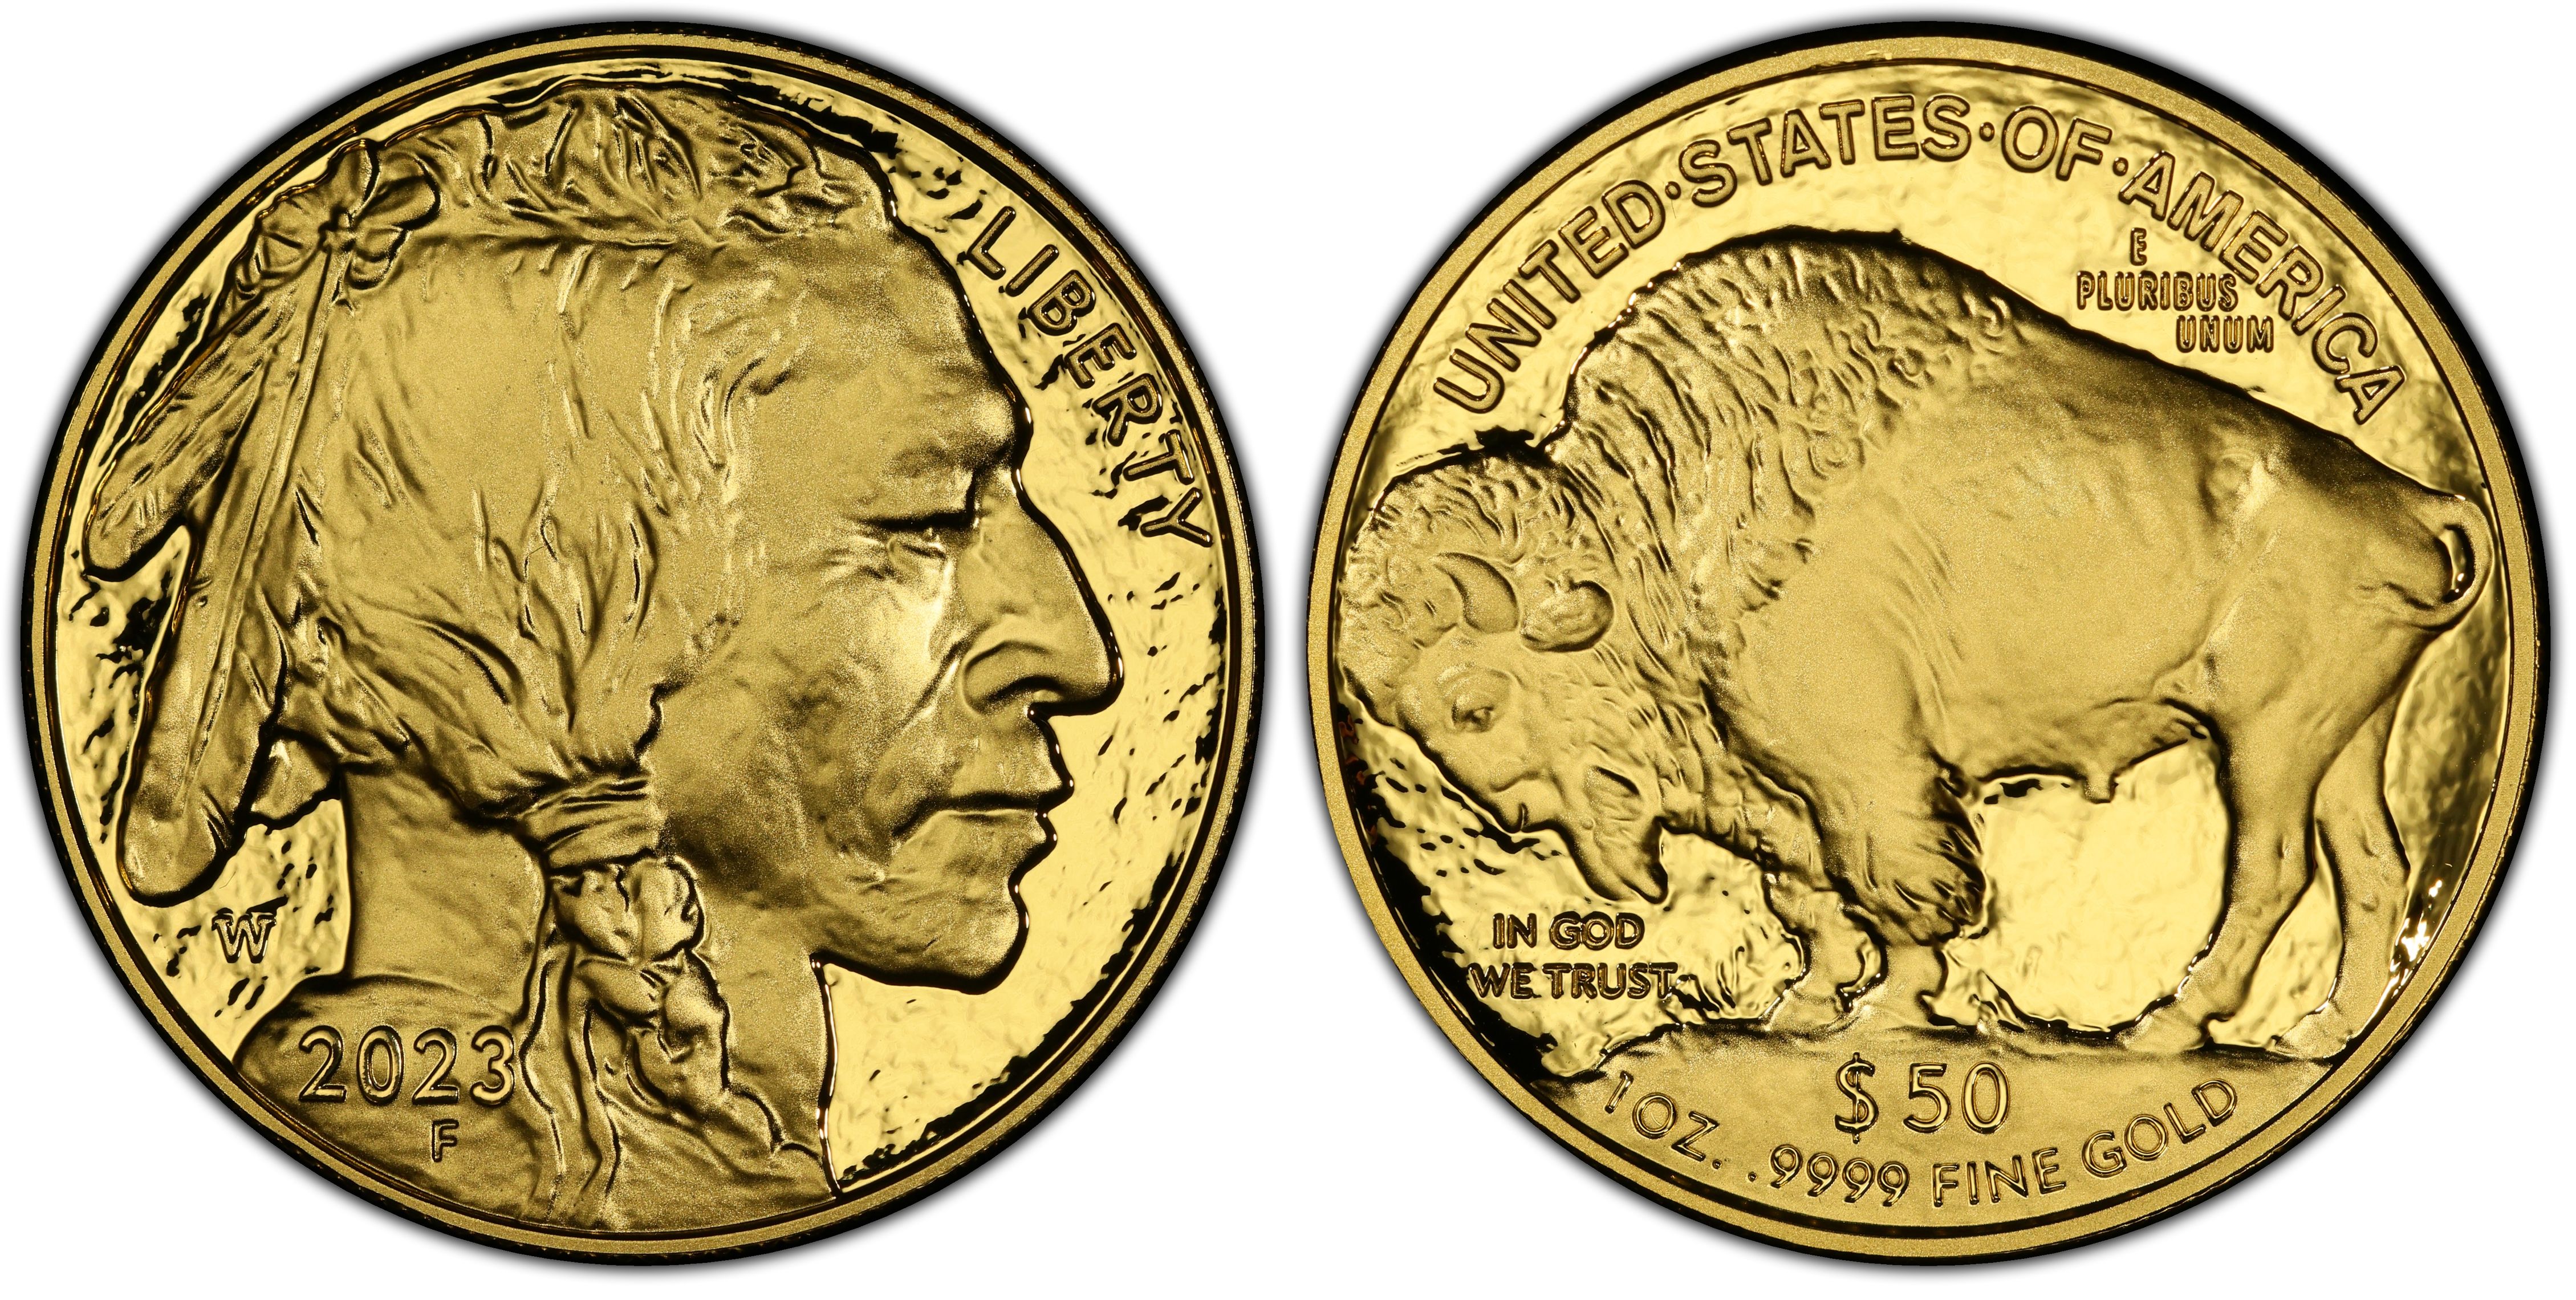 99.99% Gold Buffalo vs 91.67% Gold Eagle - Coin Ping Test in 2023